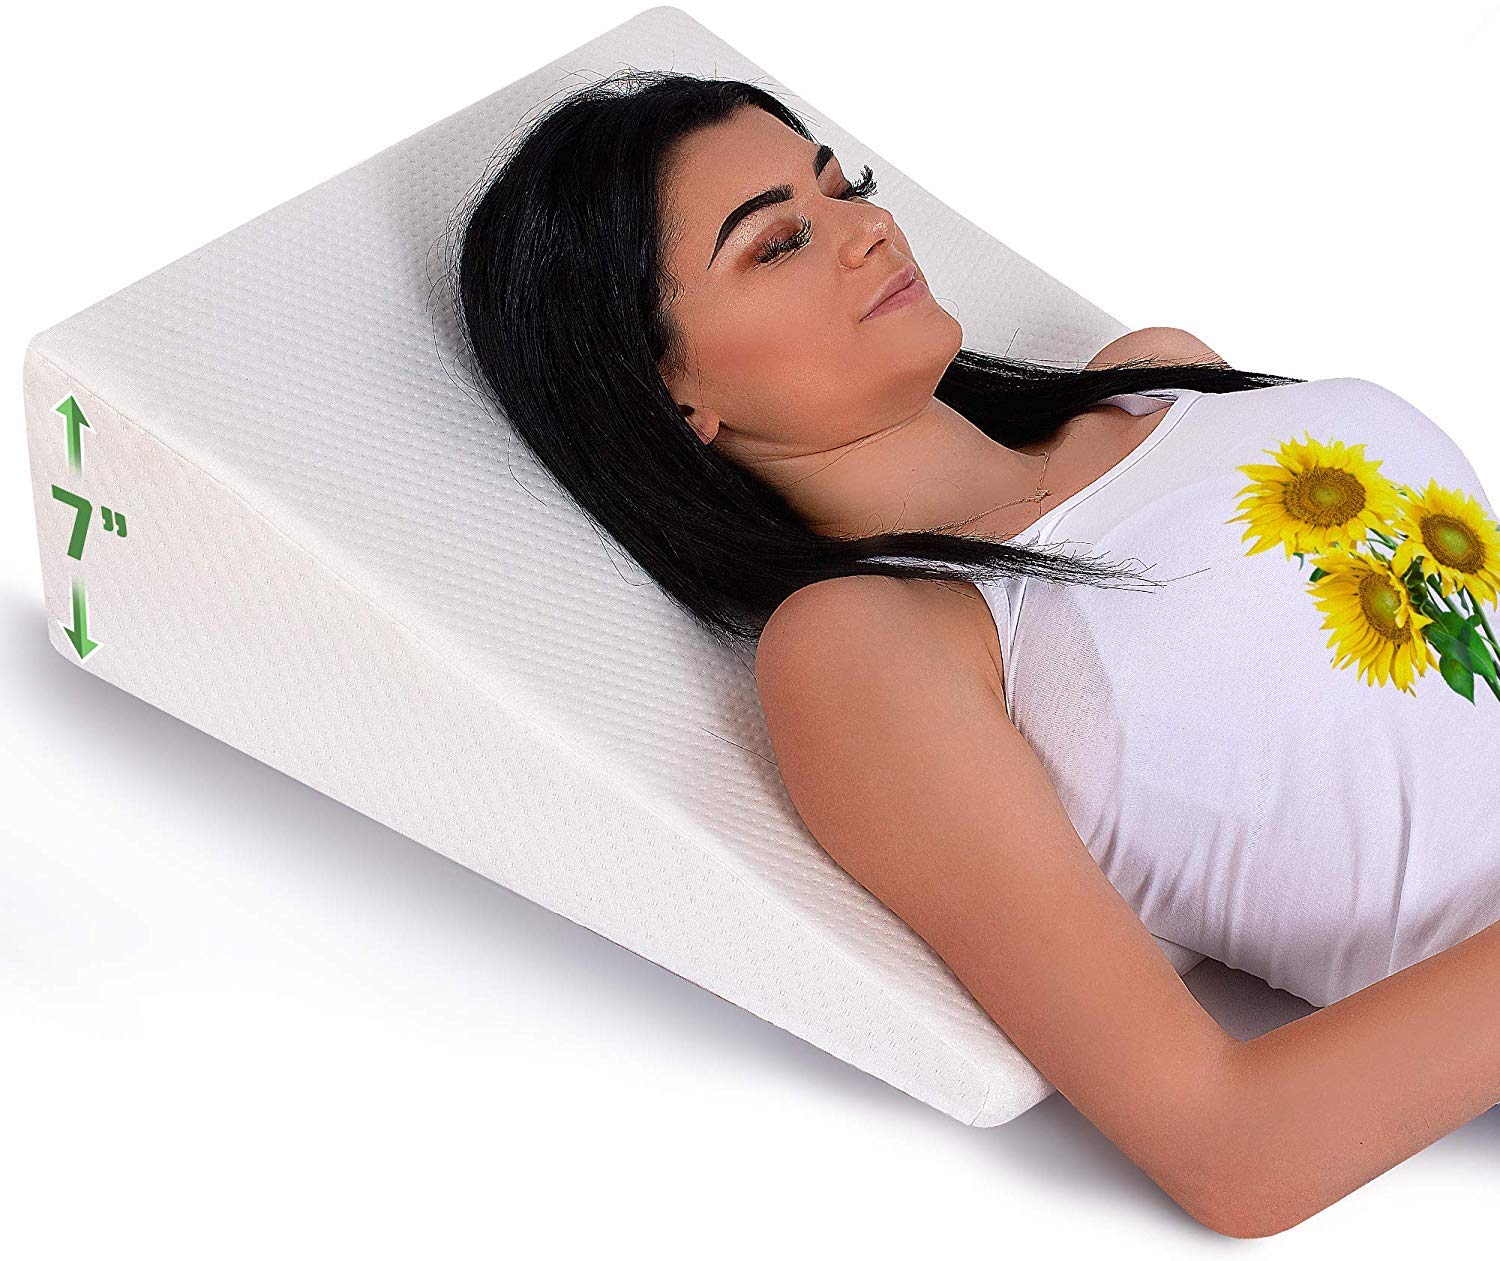 Bed Wedge Pillow with Memory Foam Top - Reduce Neck and Back Pain, Snoring, Acid Reflux and Respiratory Problems - Ideal for Sleeping, Reading, Rest or Elevation - Breathable and Washable Cover - 12in  - Good